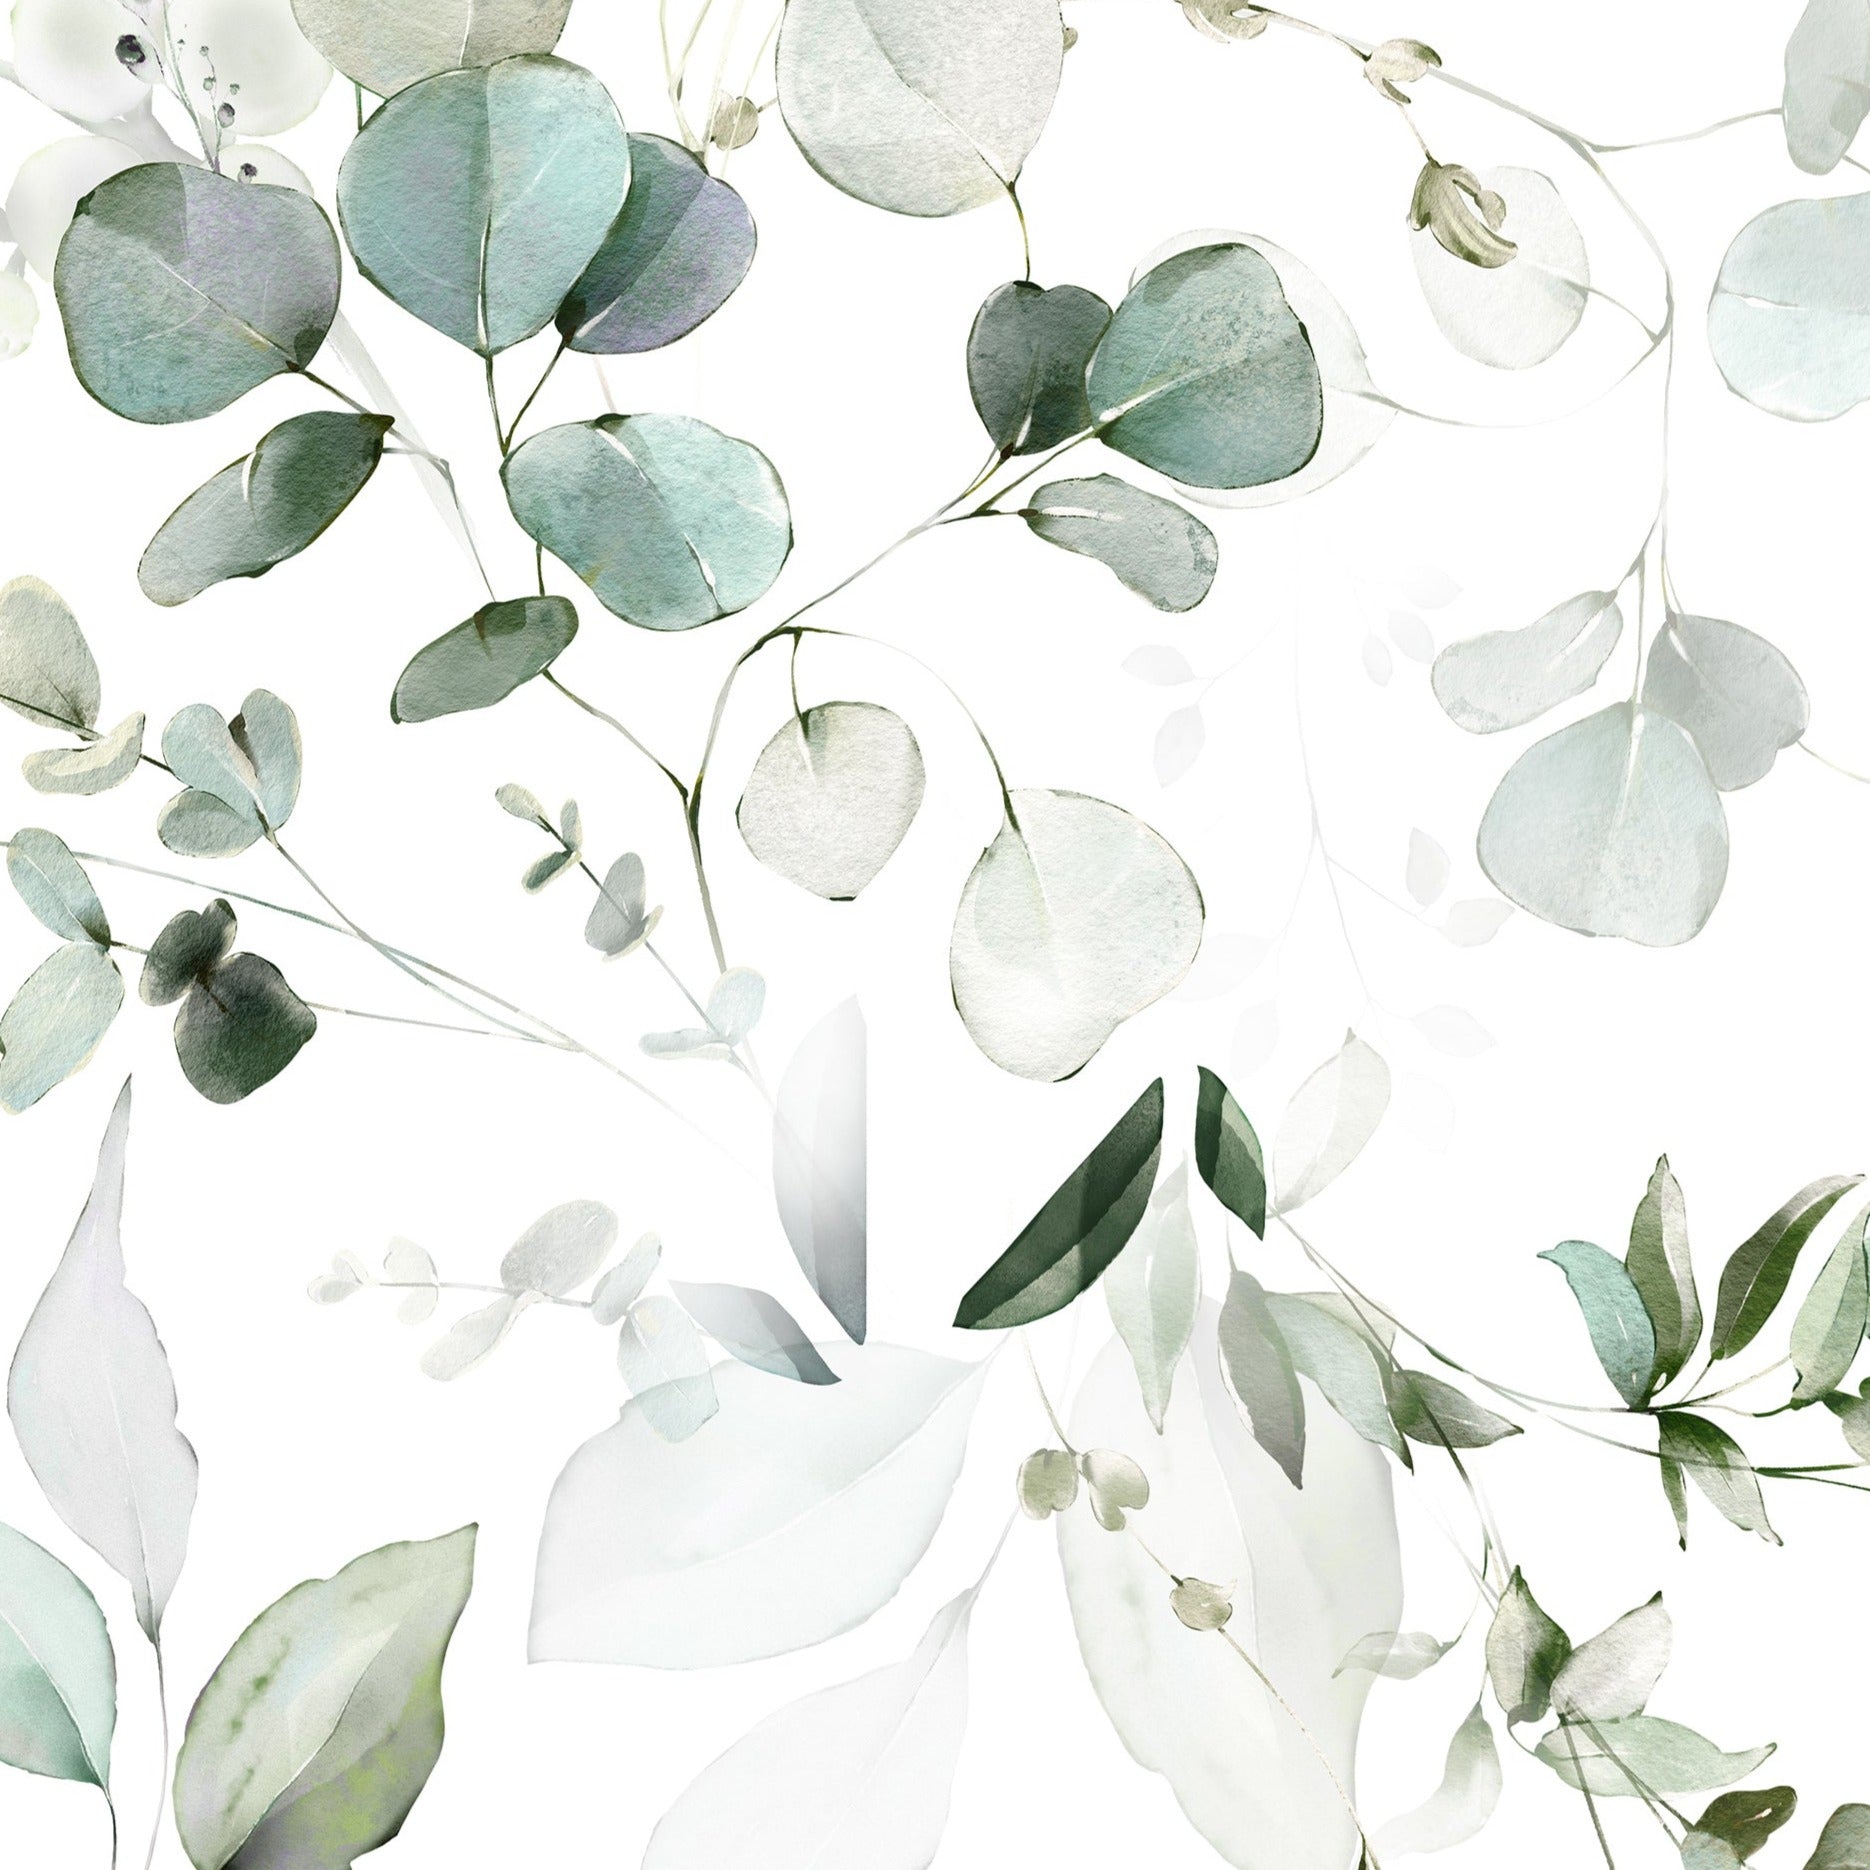 Close-up of the Eucalyptus Wallpaper depicting watercolor eucalyptus leaves in varying shades of green, creating a serene and natural atmosphere with a hand-painted aesthetic.